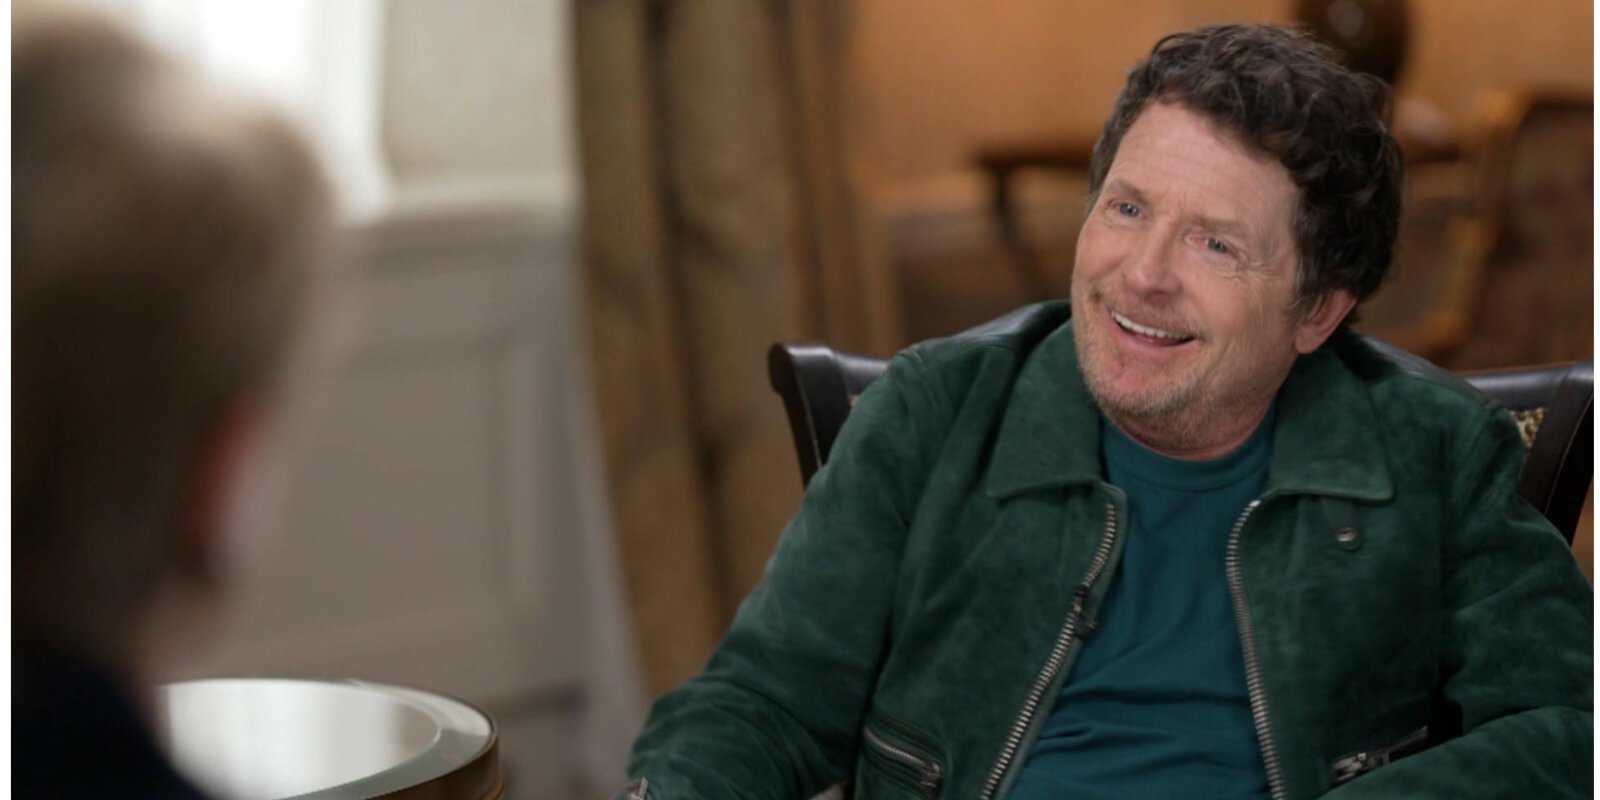 Michael J. Fox discussed how Parkinson's Disease impacts his life on 'CBS Sunday Morning.'